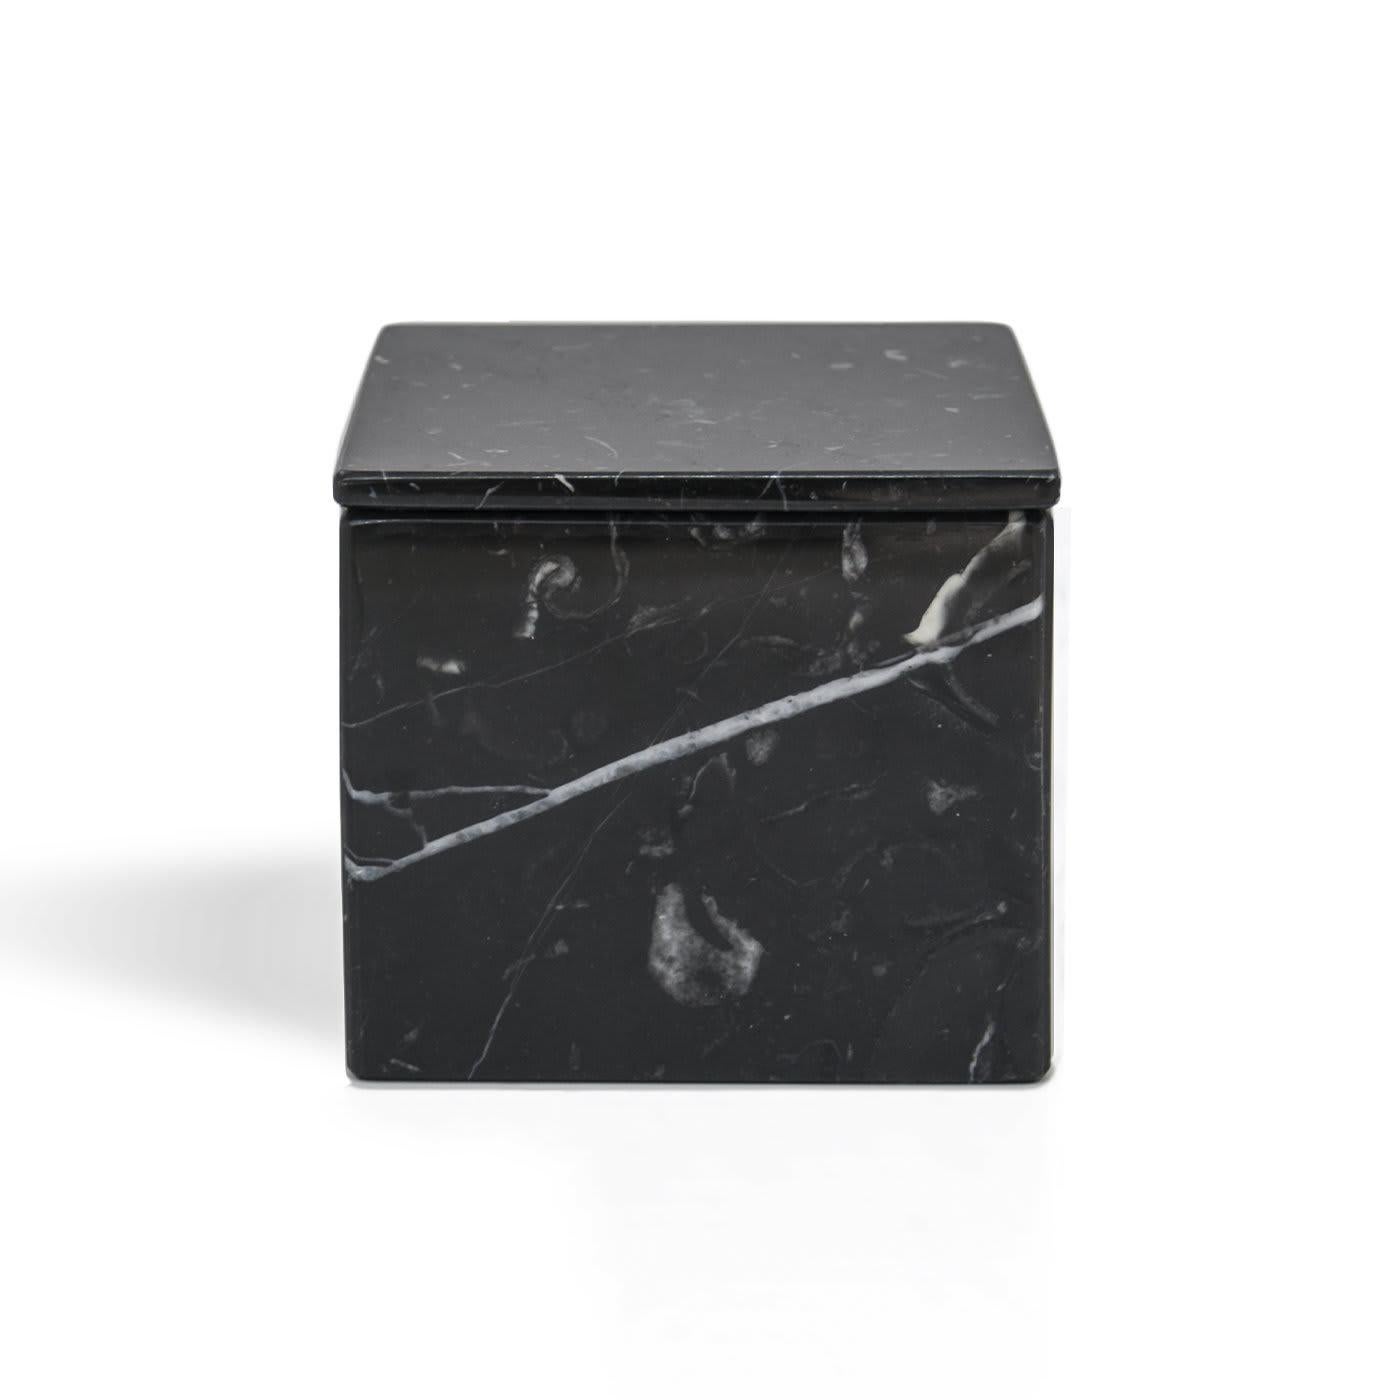 Also available in a variant in white Carrara marble, this cube-shaped box with lid made of black Marquina marble is a versatile item fit for the bathroom, bedroom, or kitchen. Its aesthetic is unrepeatable thanks to the use of natural stone and the